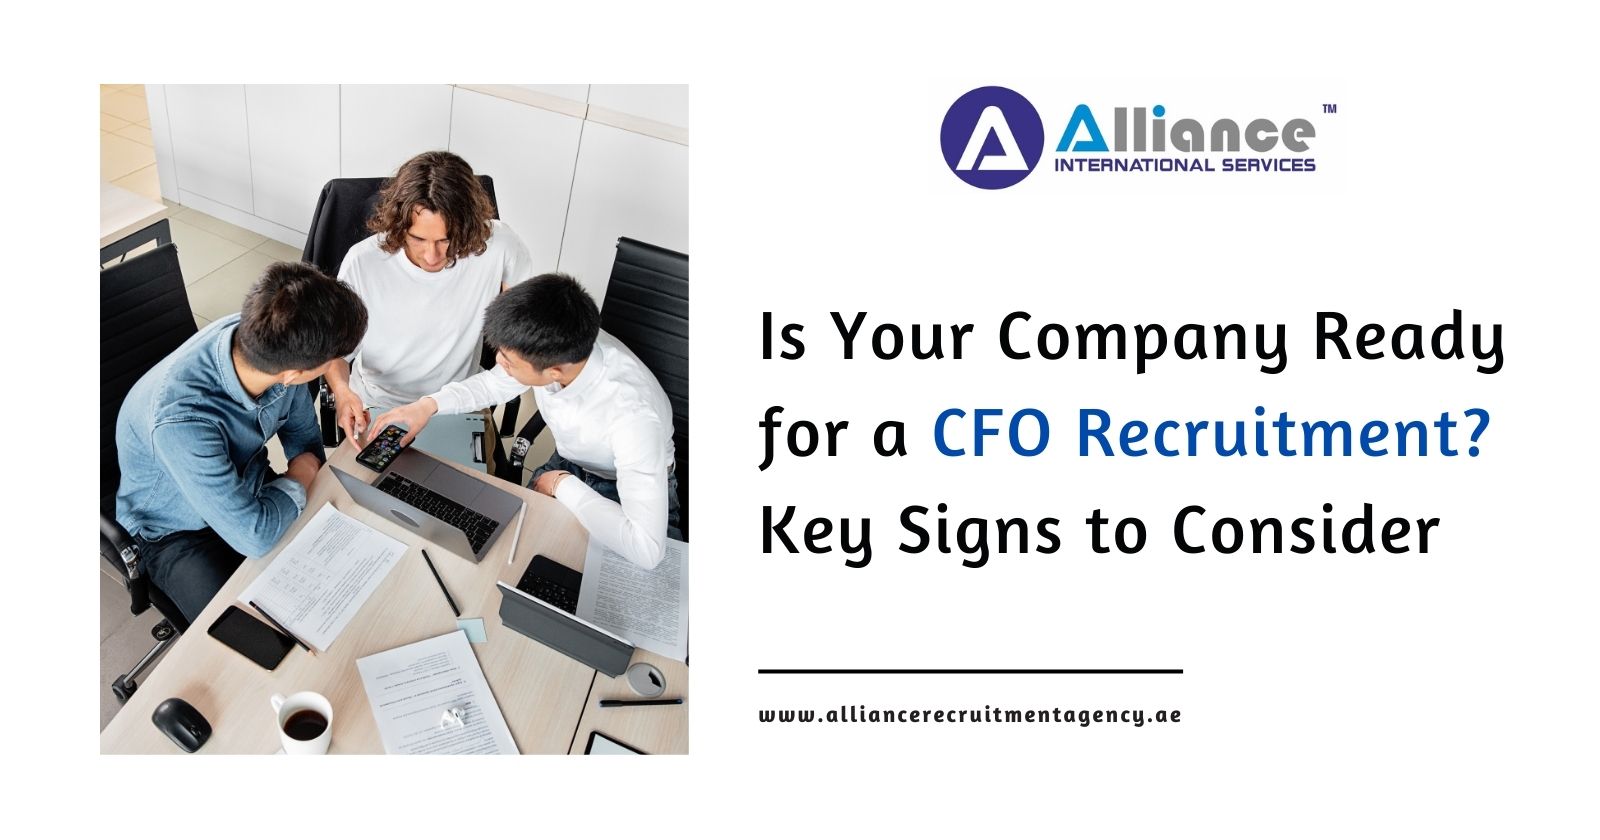 Is Your Company Ready for a CFO Recruitment? Key Signs to Consider